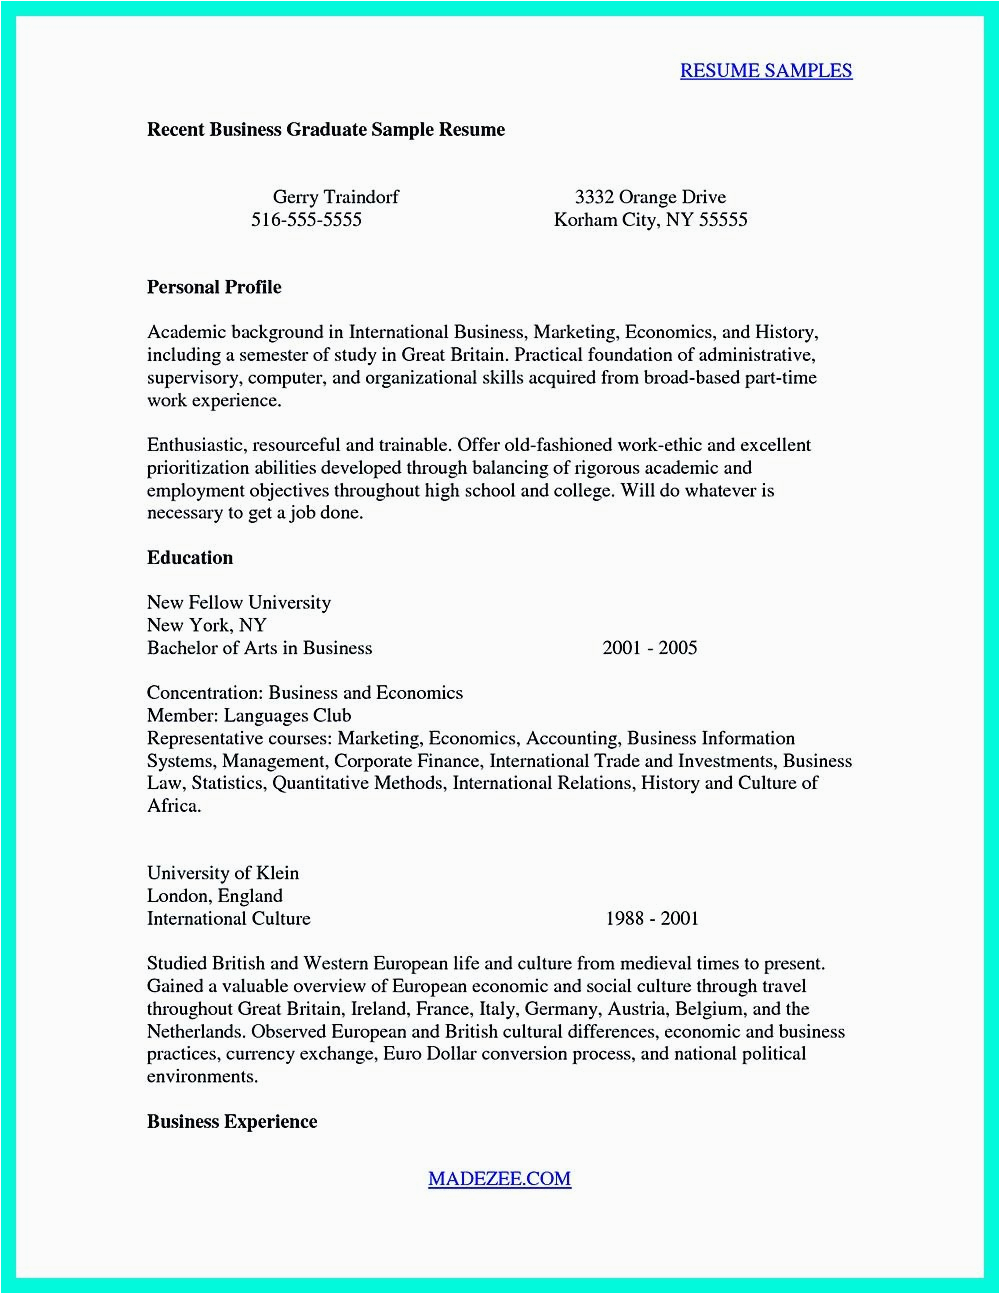 Resume Templates for Recent College Graduate with No Experience Cool Sample Of College Graduate Resume with No Experience